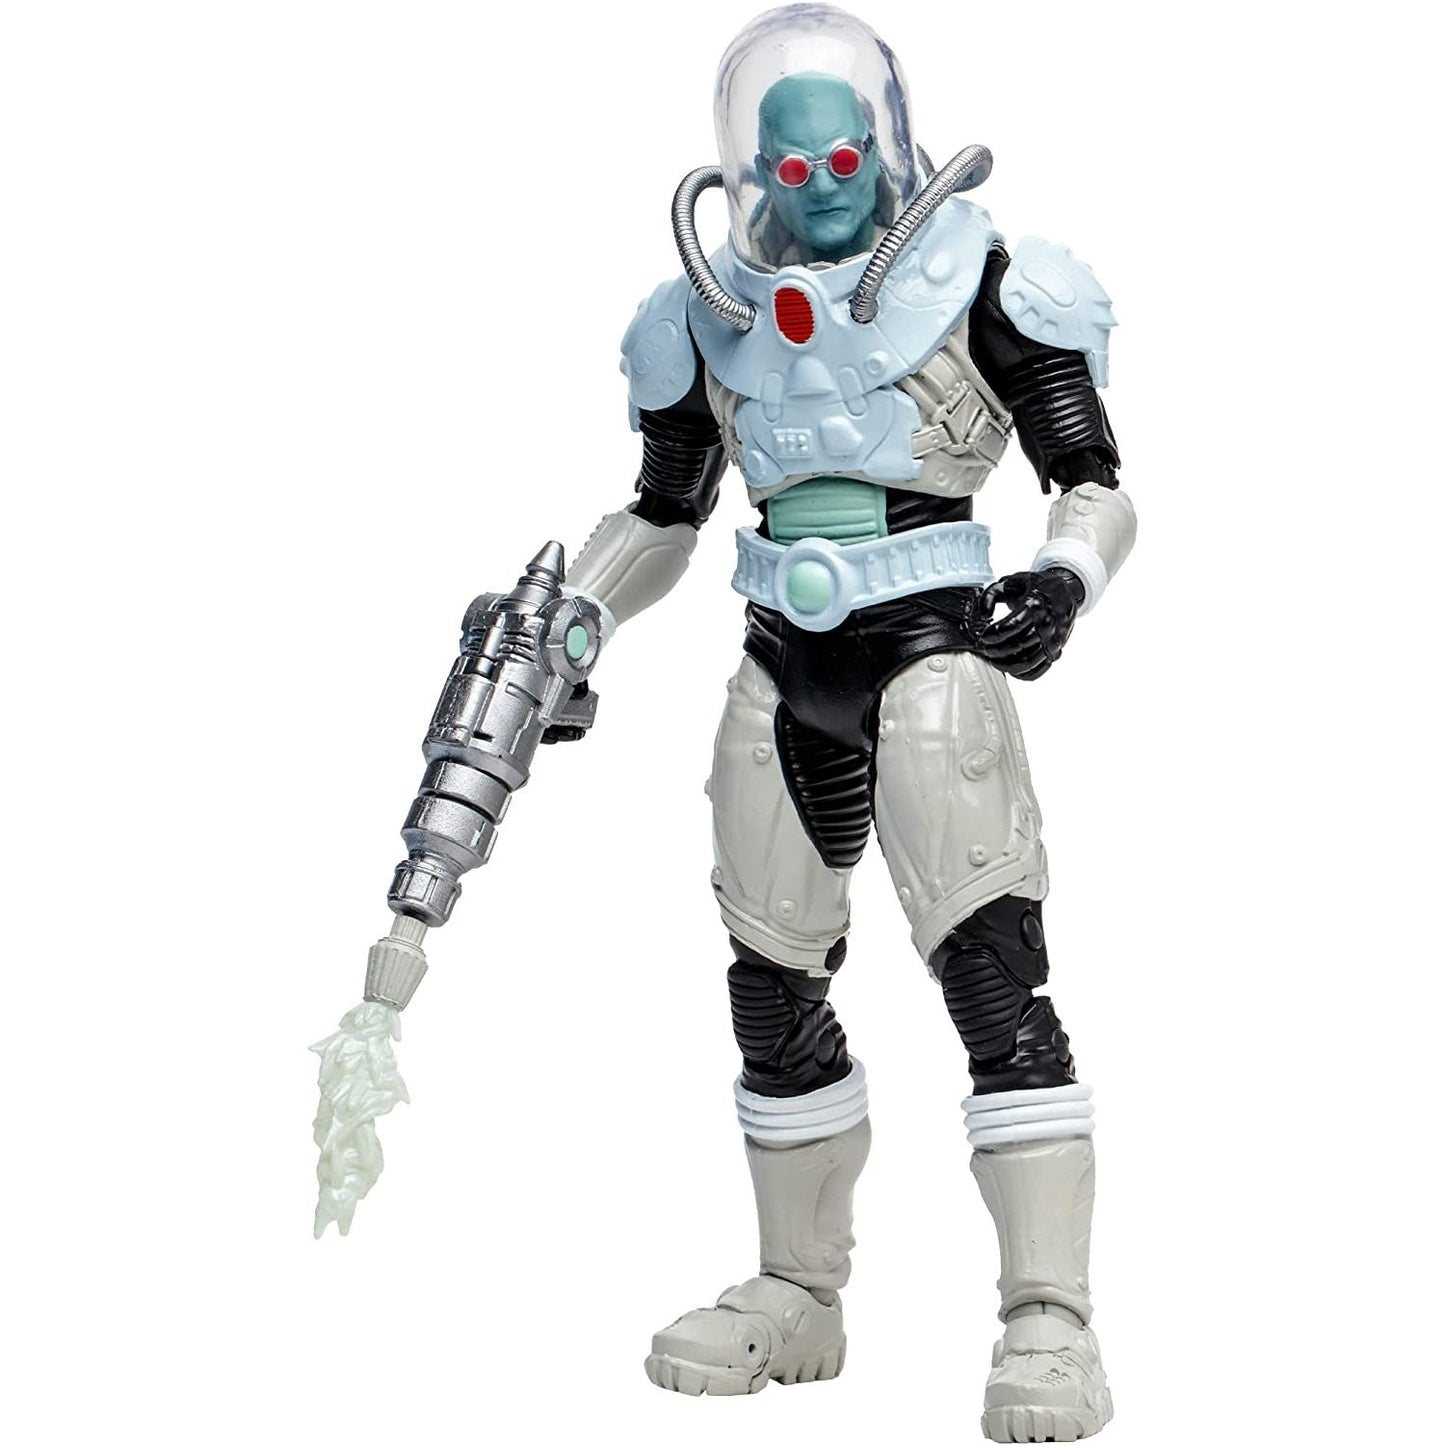 DC Multiverse Mr. Freeze Victor Fries 7-Inch Scale Action Figure